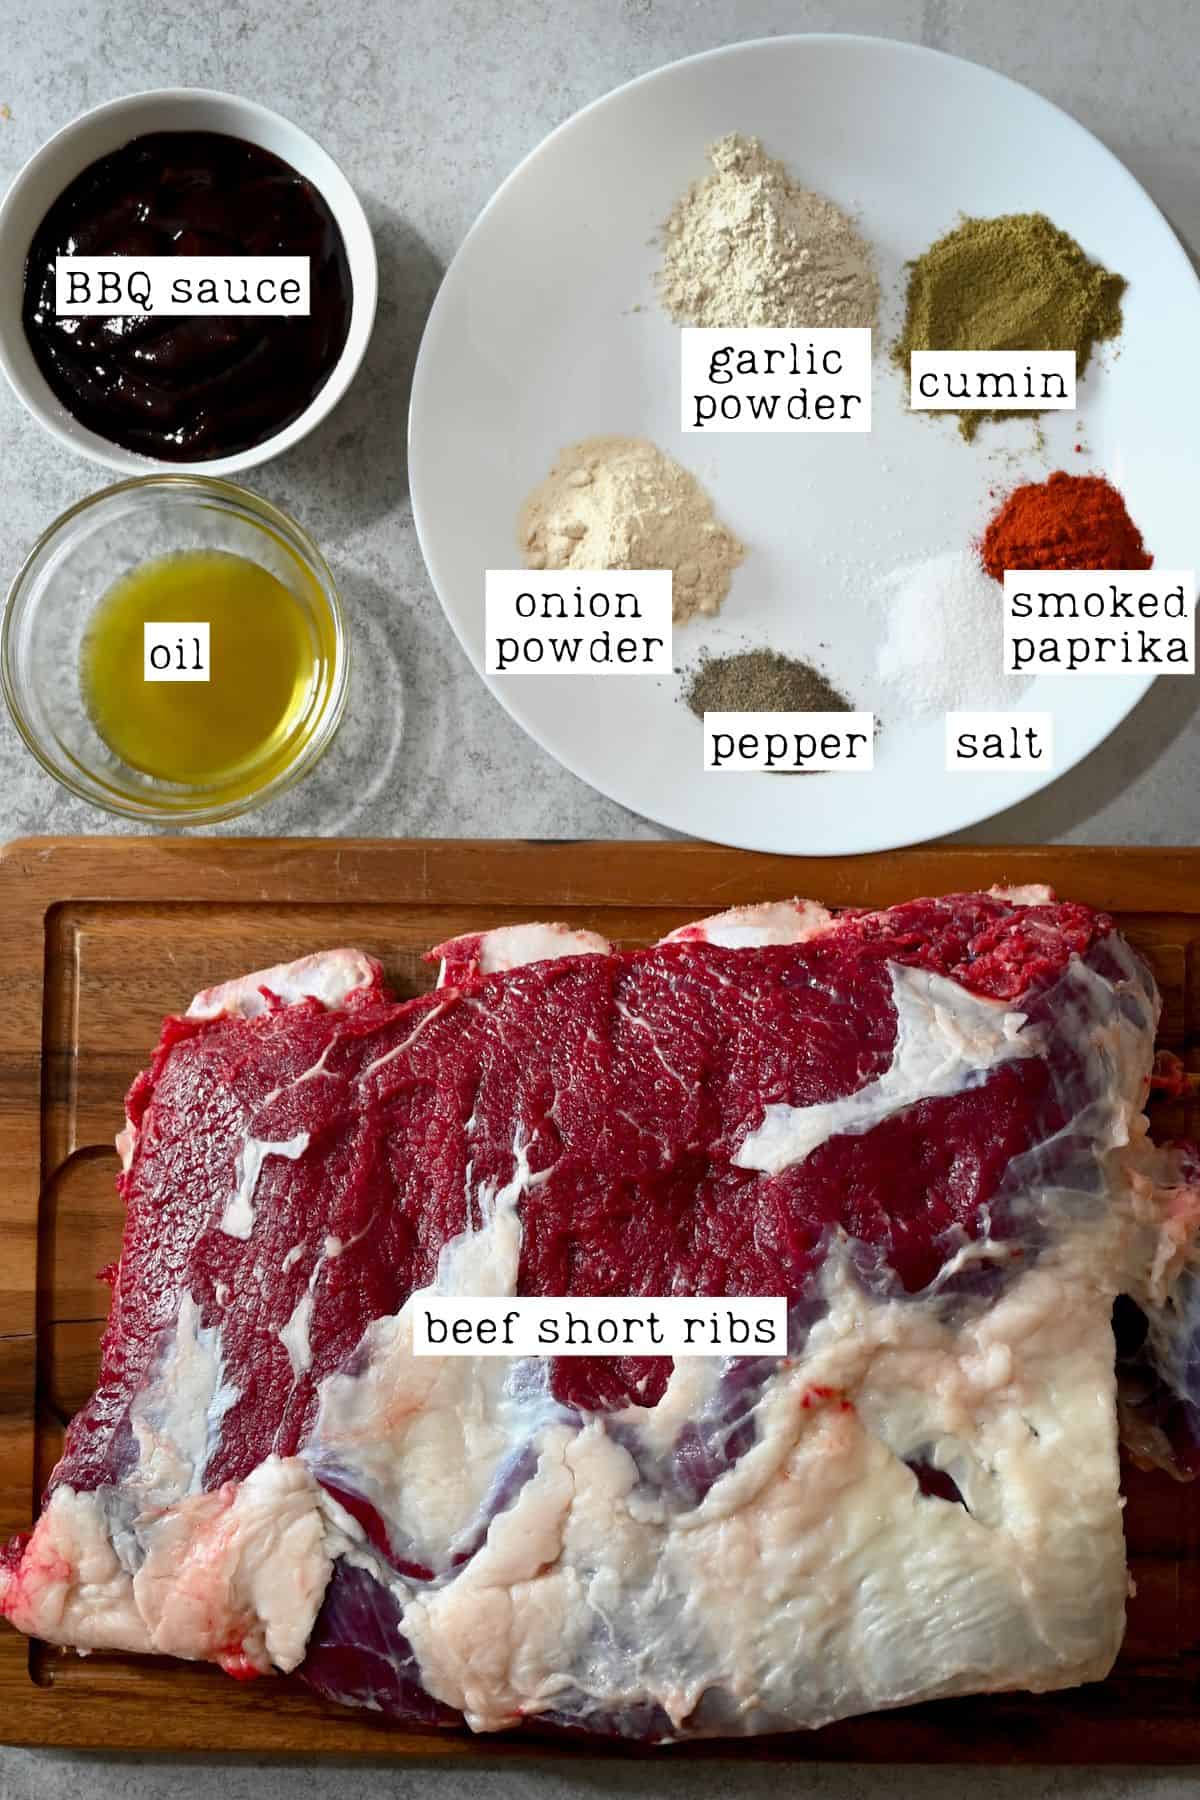 Ingredients for oven baked beef short ribs